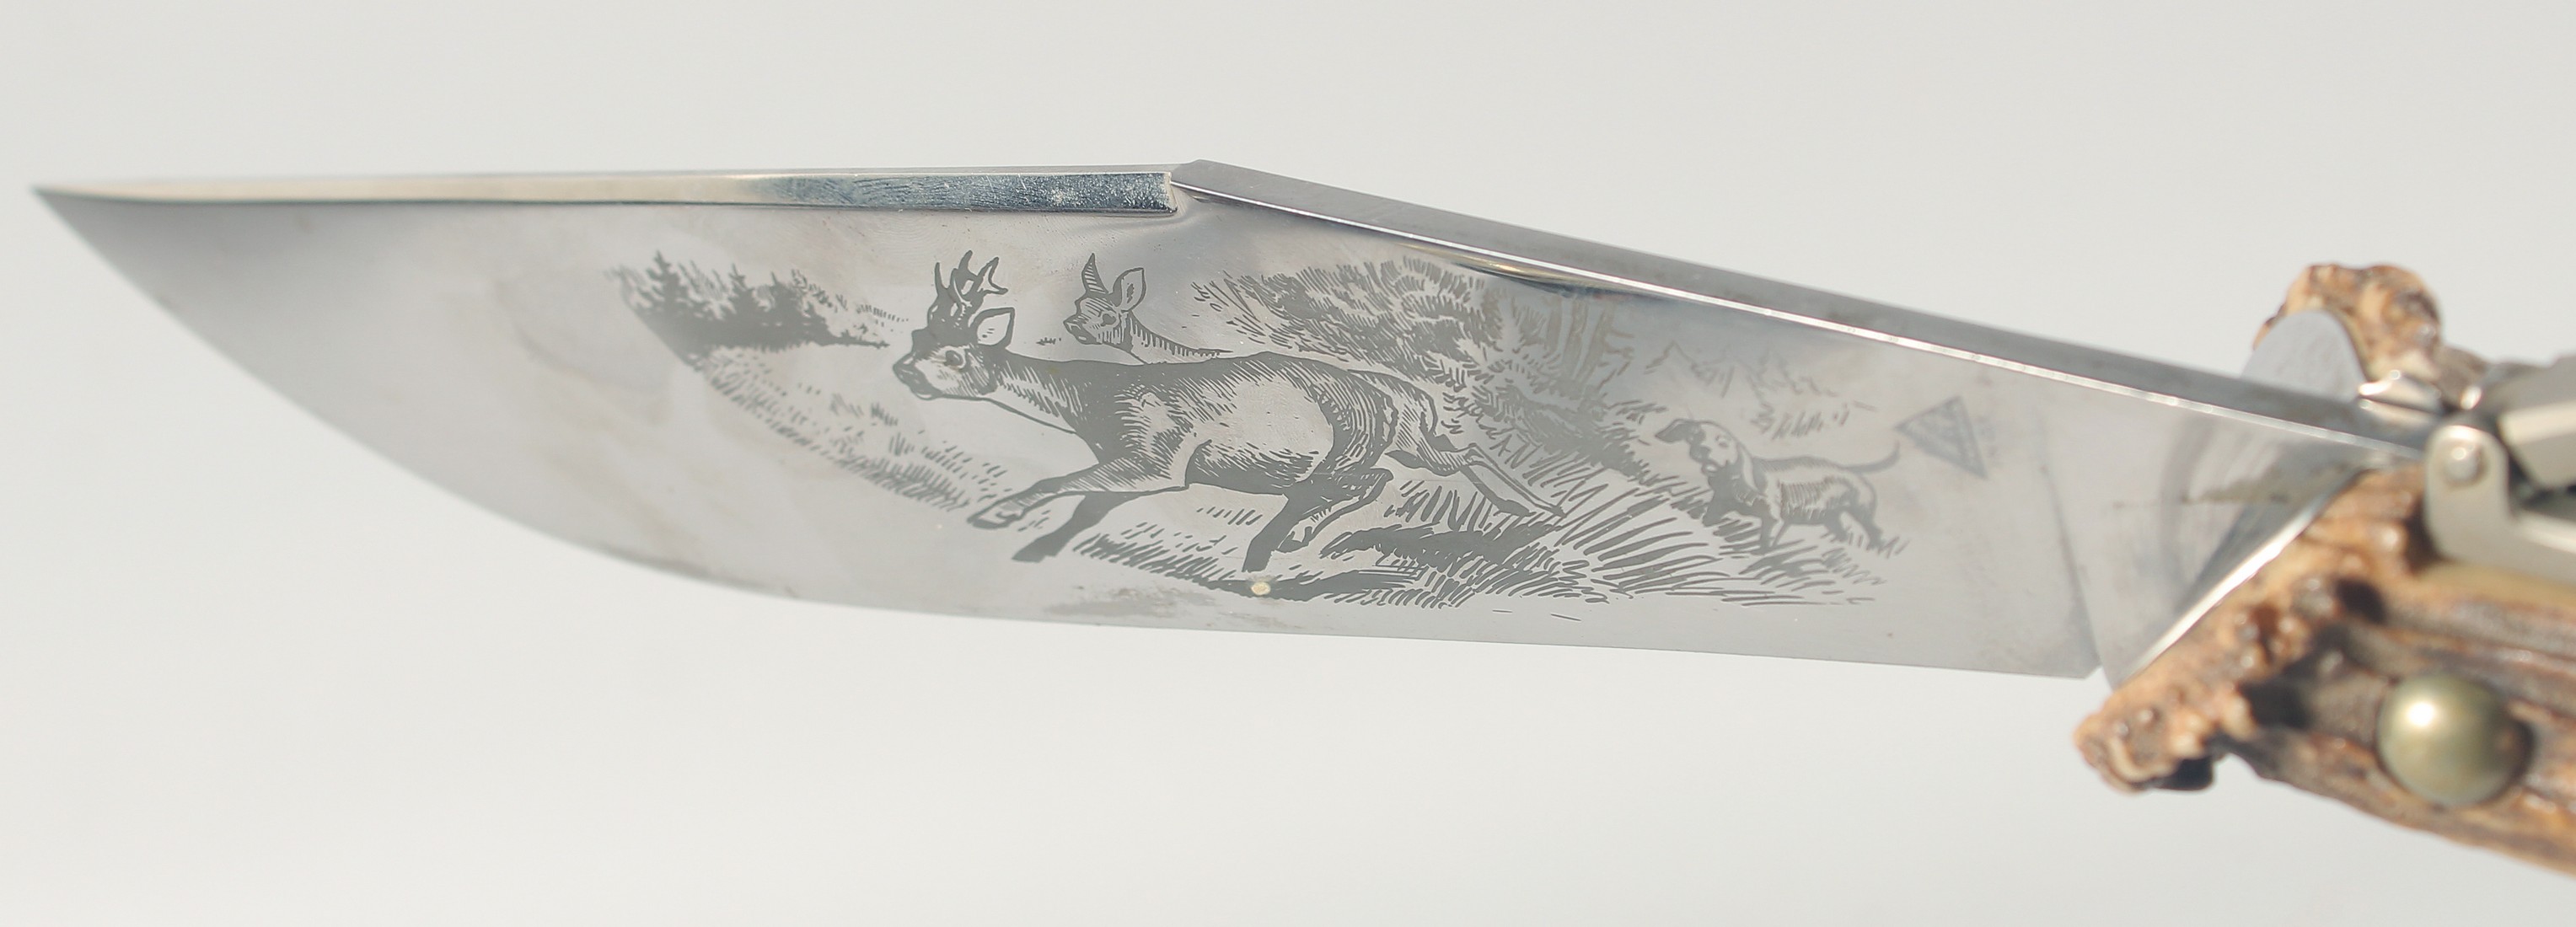 INDIANA INOX, A LARGE HUNTING KNIFE, the blade engraved with two deer and a dog, blade 12" with a - Image 2 of 7